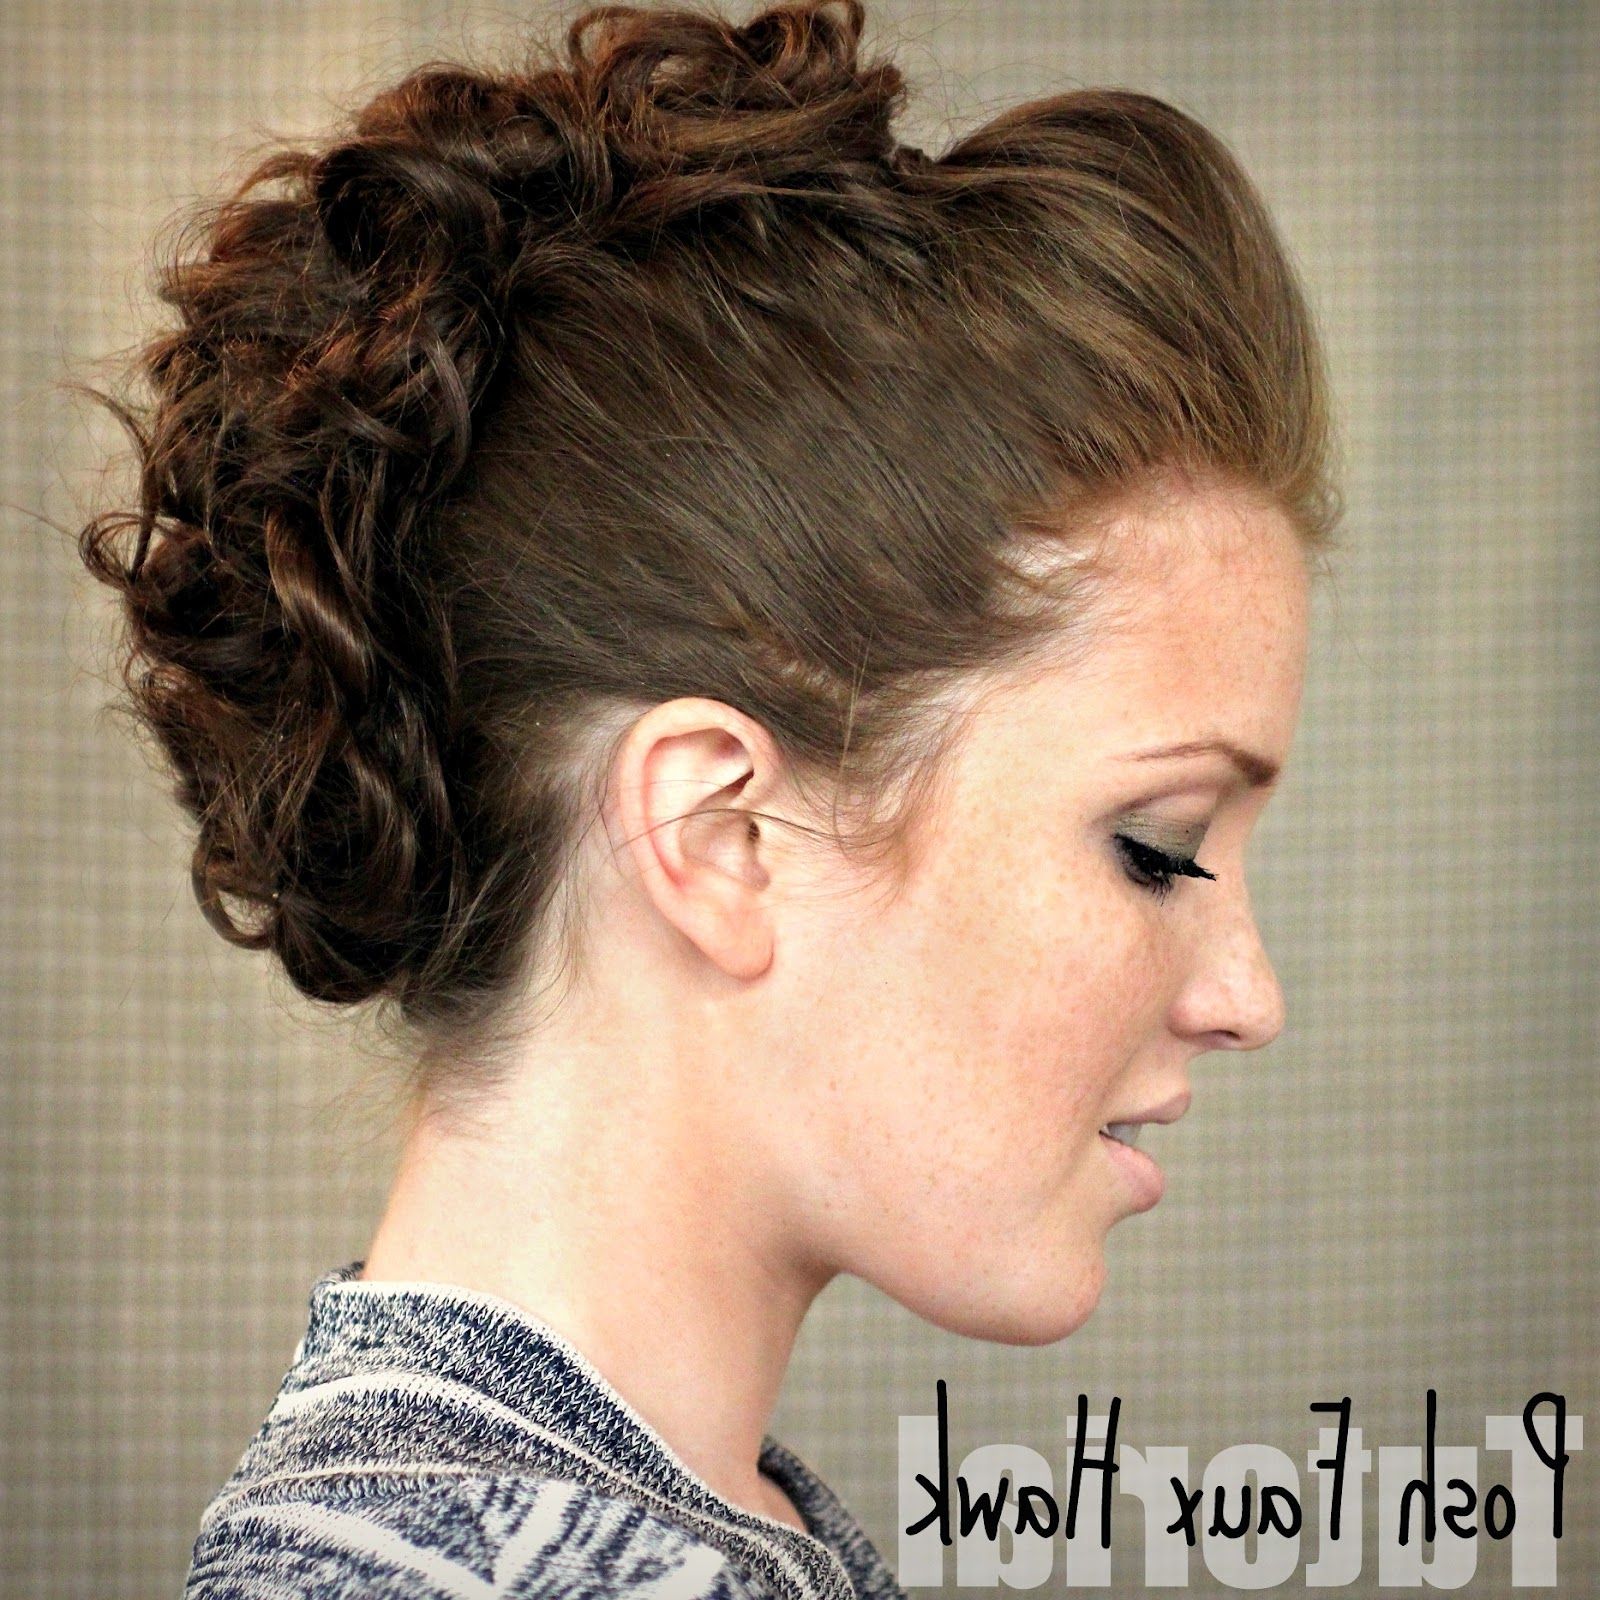 Well Known Two Trick Ponytail Faux Hawk Hairstyles Pertaining To The Freckled Fox: Hair Tutorial // Posh Faux Hawk (View 5 of 20)